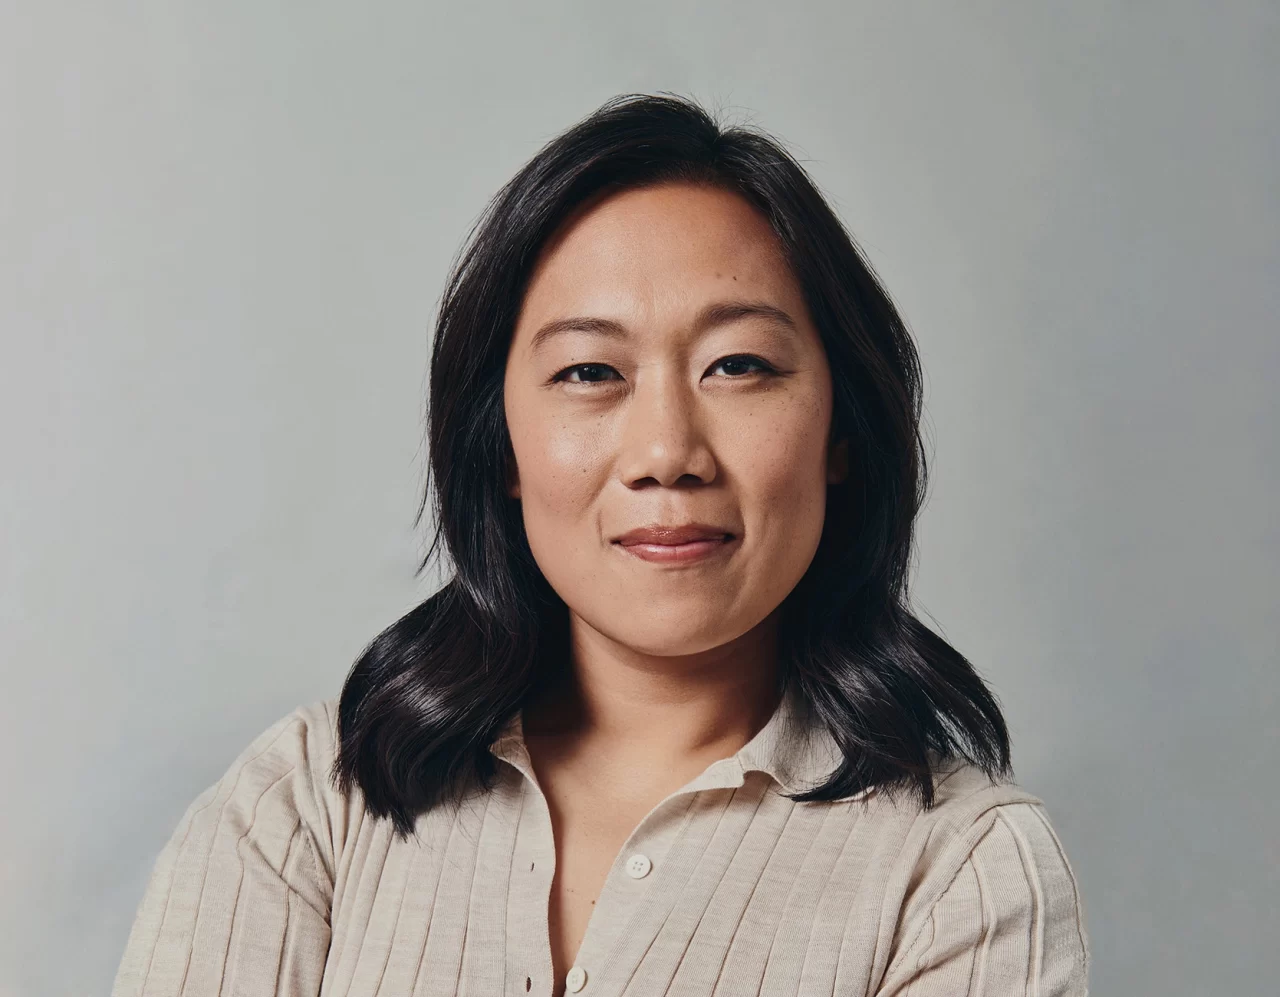 A team recently completed the Human Breast Cell Atlas – Priscilla Chan